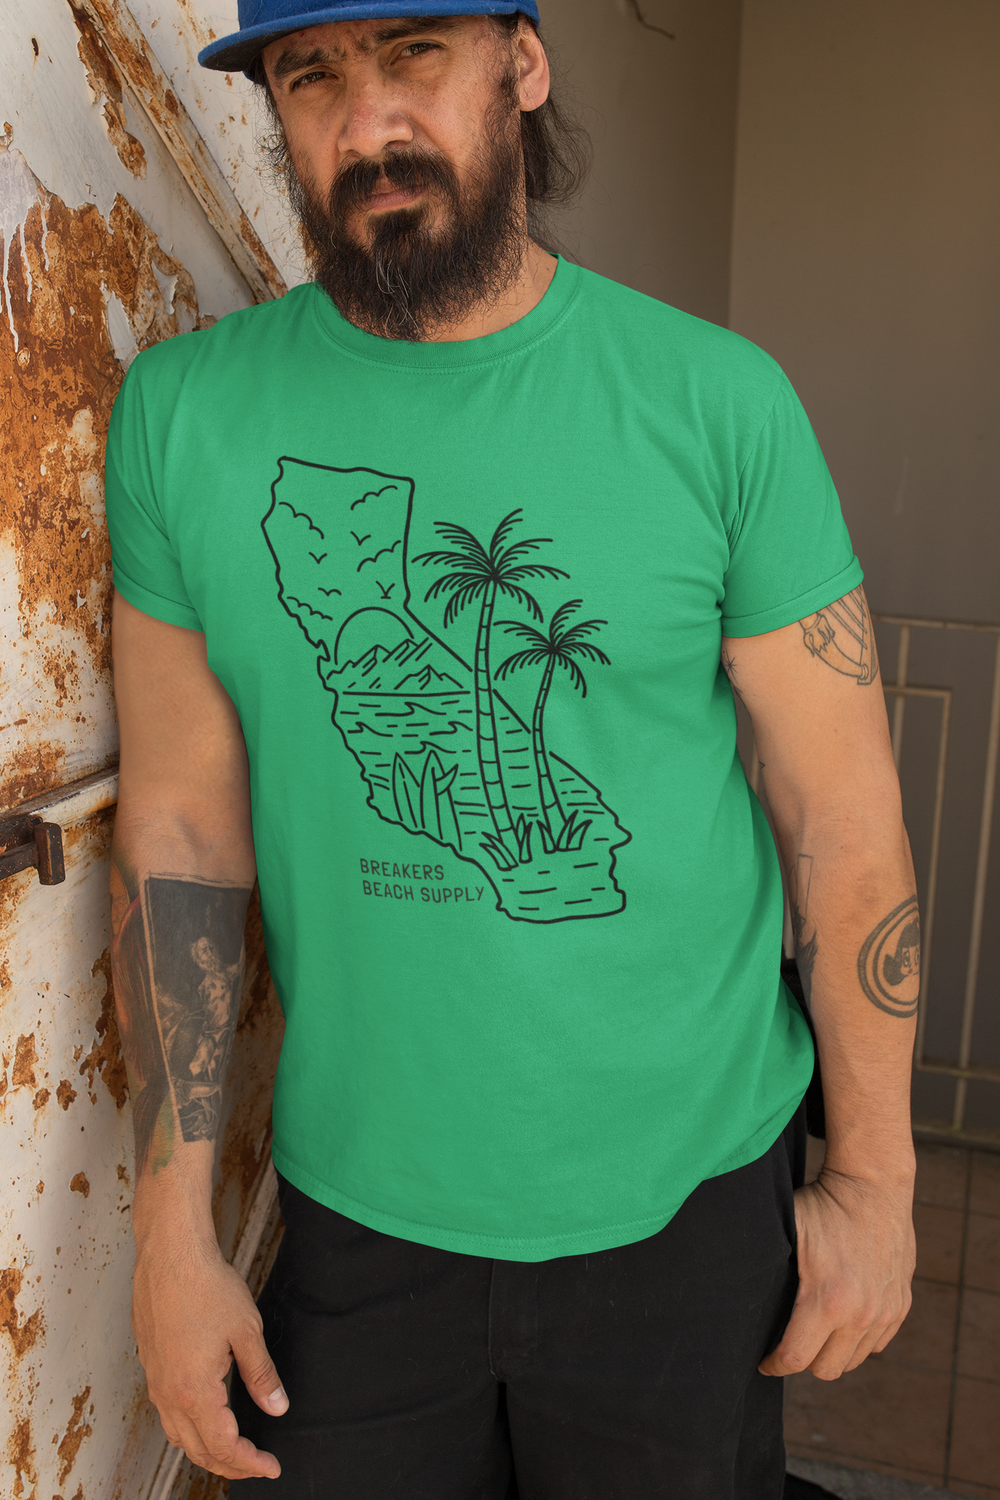 The State of Surf - Unisex Triblend T-shirt